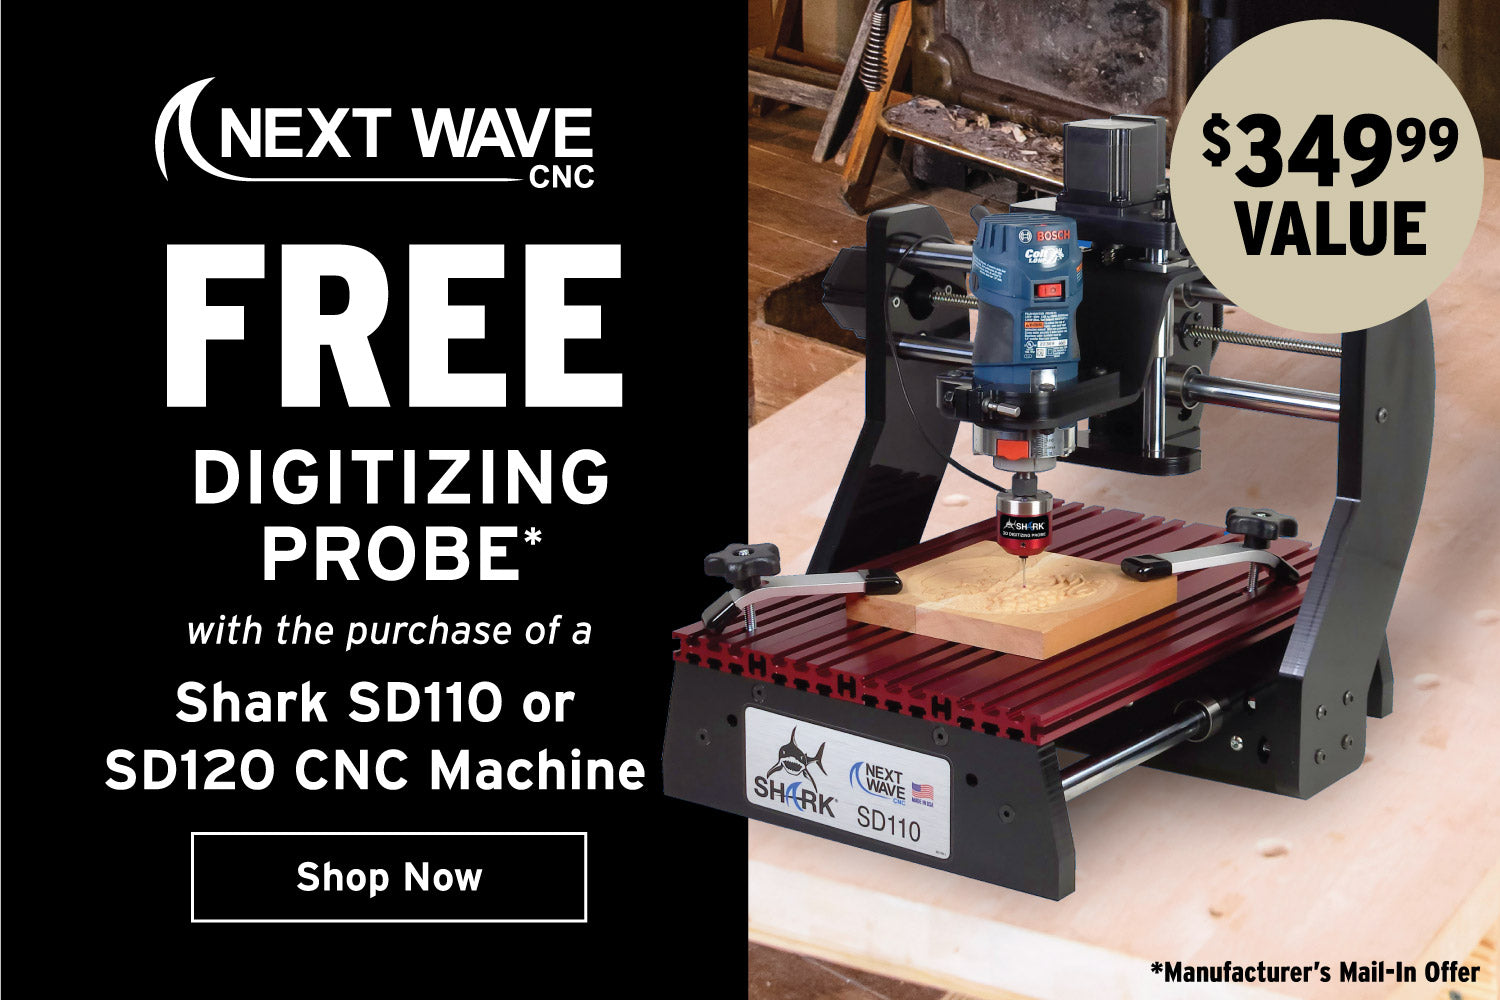 Next Wave CNC. Free digitizing probe with the purchase of a Shark SD110 or SD120 CNC machine.